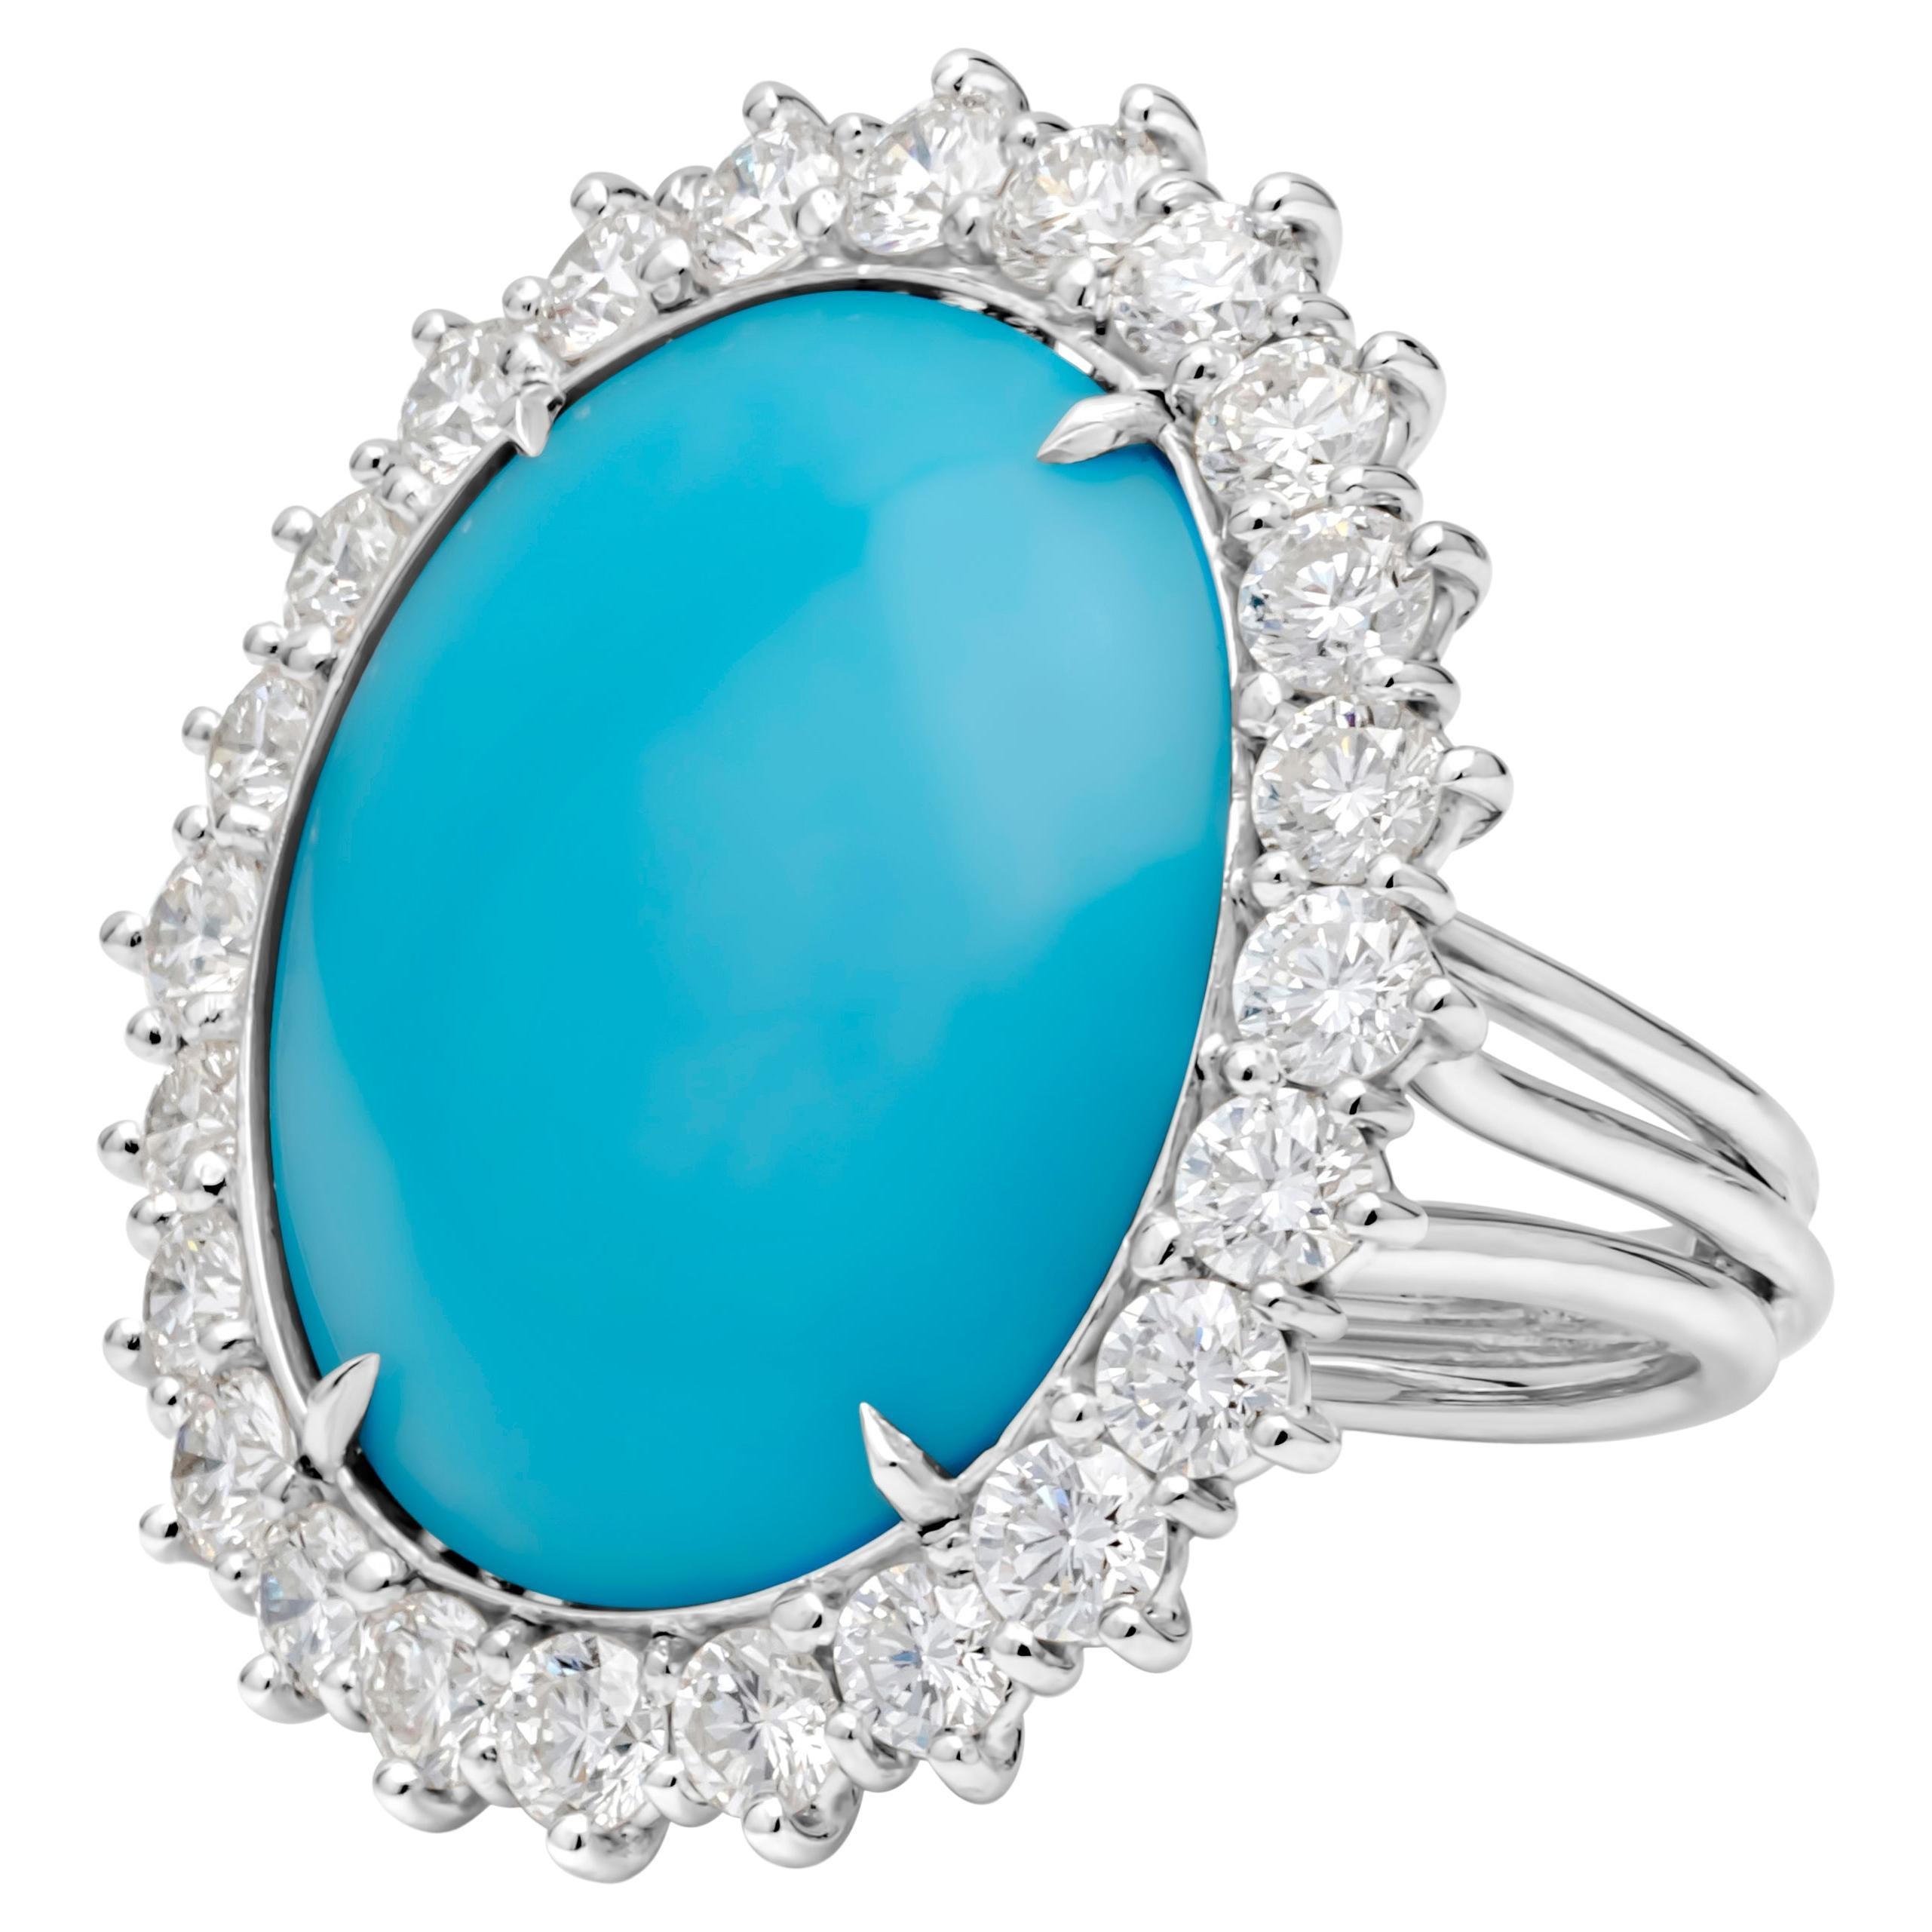 This magnificent and luminous fashion ring showcases 12.90 carats total oval cut blue turquoise gemstone from the sleeping beauty turquoise mine(one of the most well known producers of turquoise in the world), set in a classic four prong basket